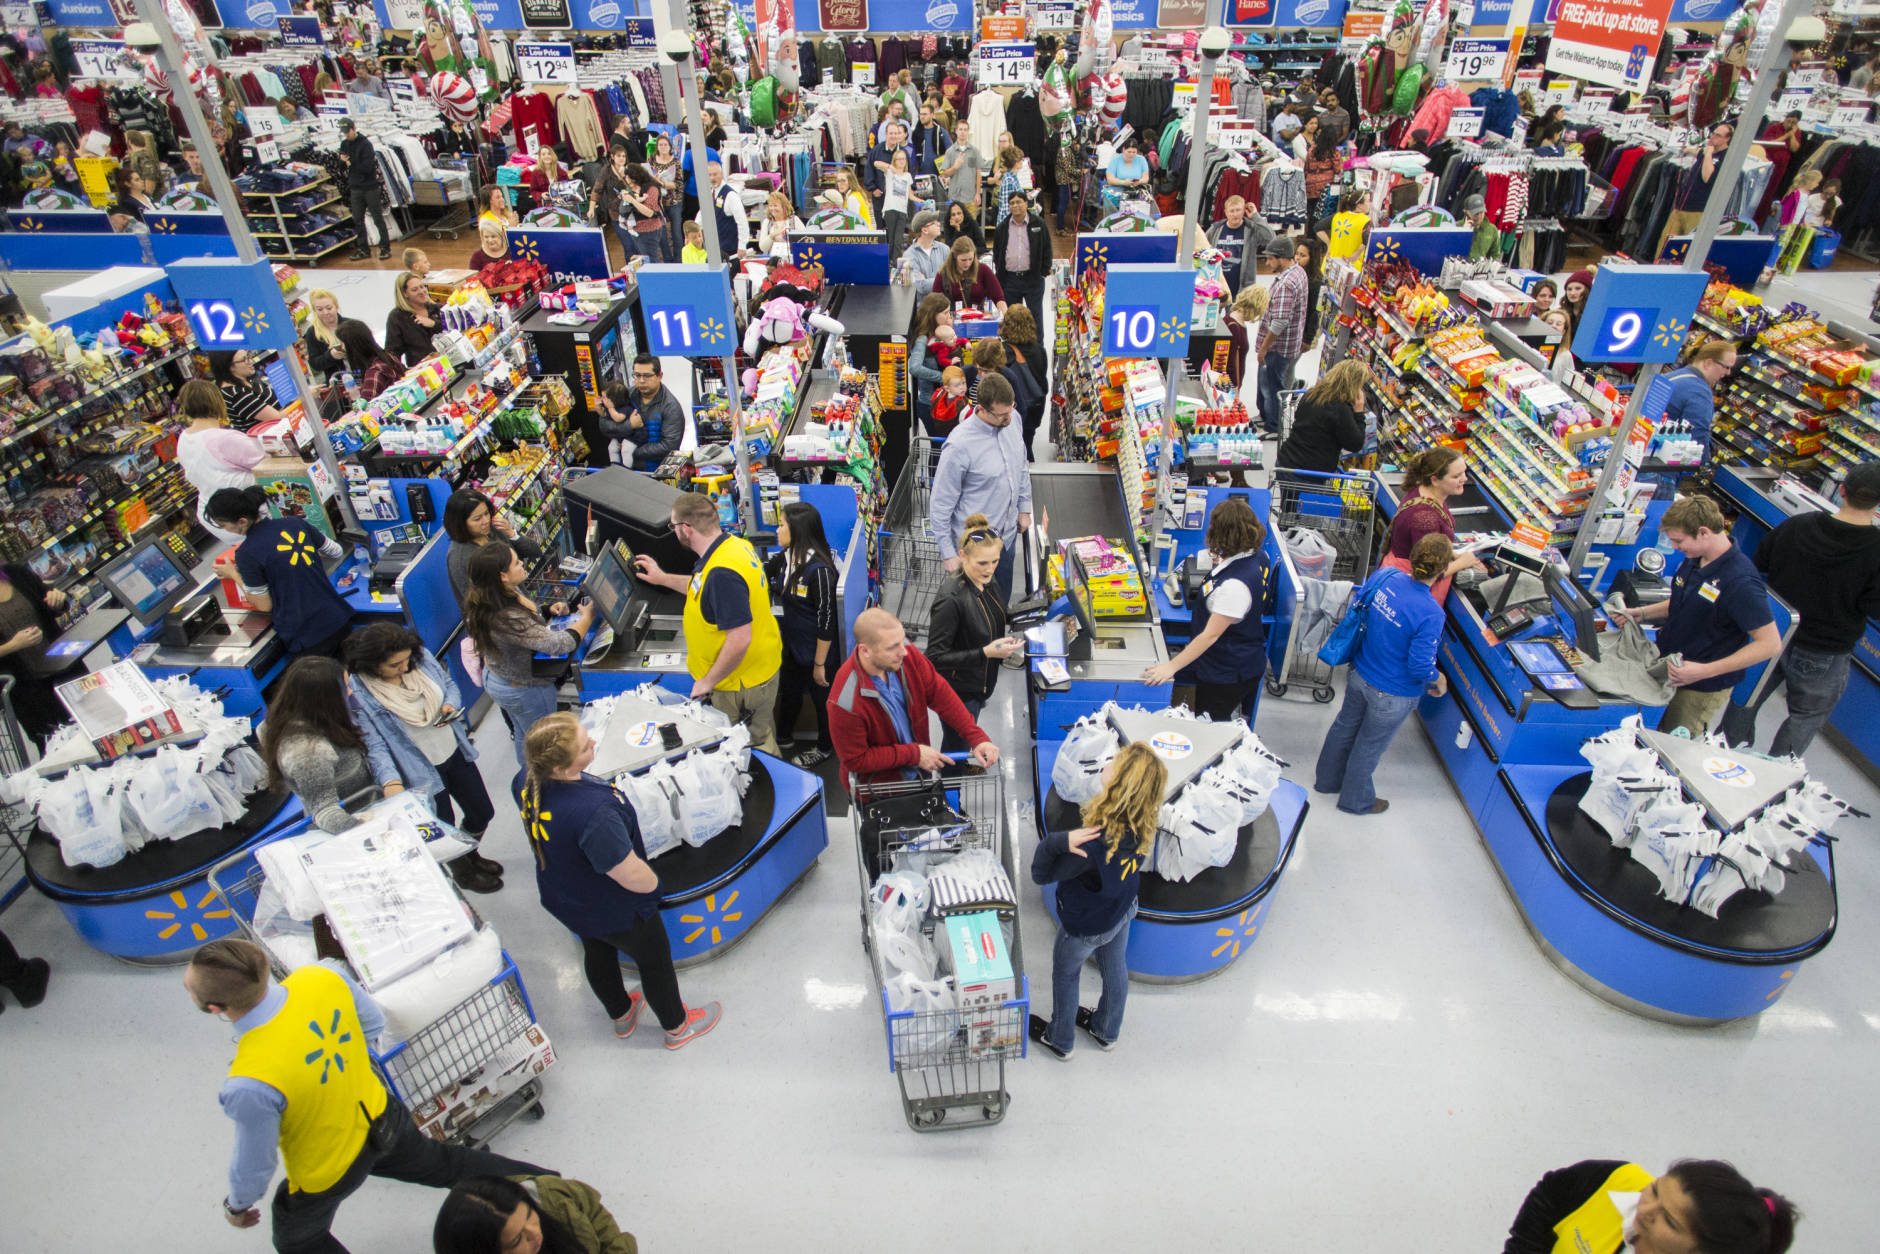 IMAGE DISTRIBUTED FOR WALMART - Customers leave happy from a Walmart store in Bentonville, AR, with their Black Friday items on Thursday, Nov. 24, 2016. This year, Walmart stocked its digital and physical aisles with more than 1.5 million televisions, nearly two million tablets and computers and three million video games. (Gunnar Rathbun/AP Images for Walmart)